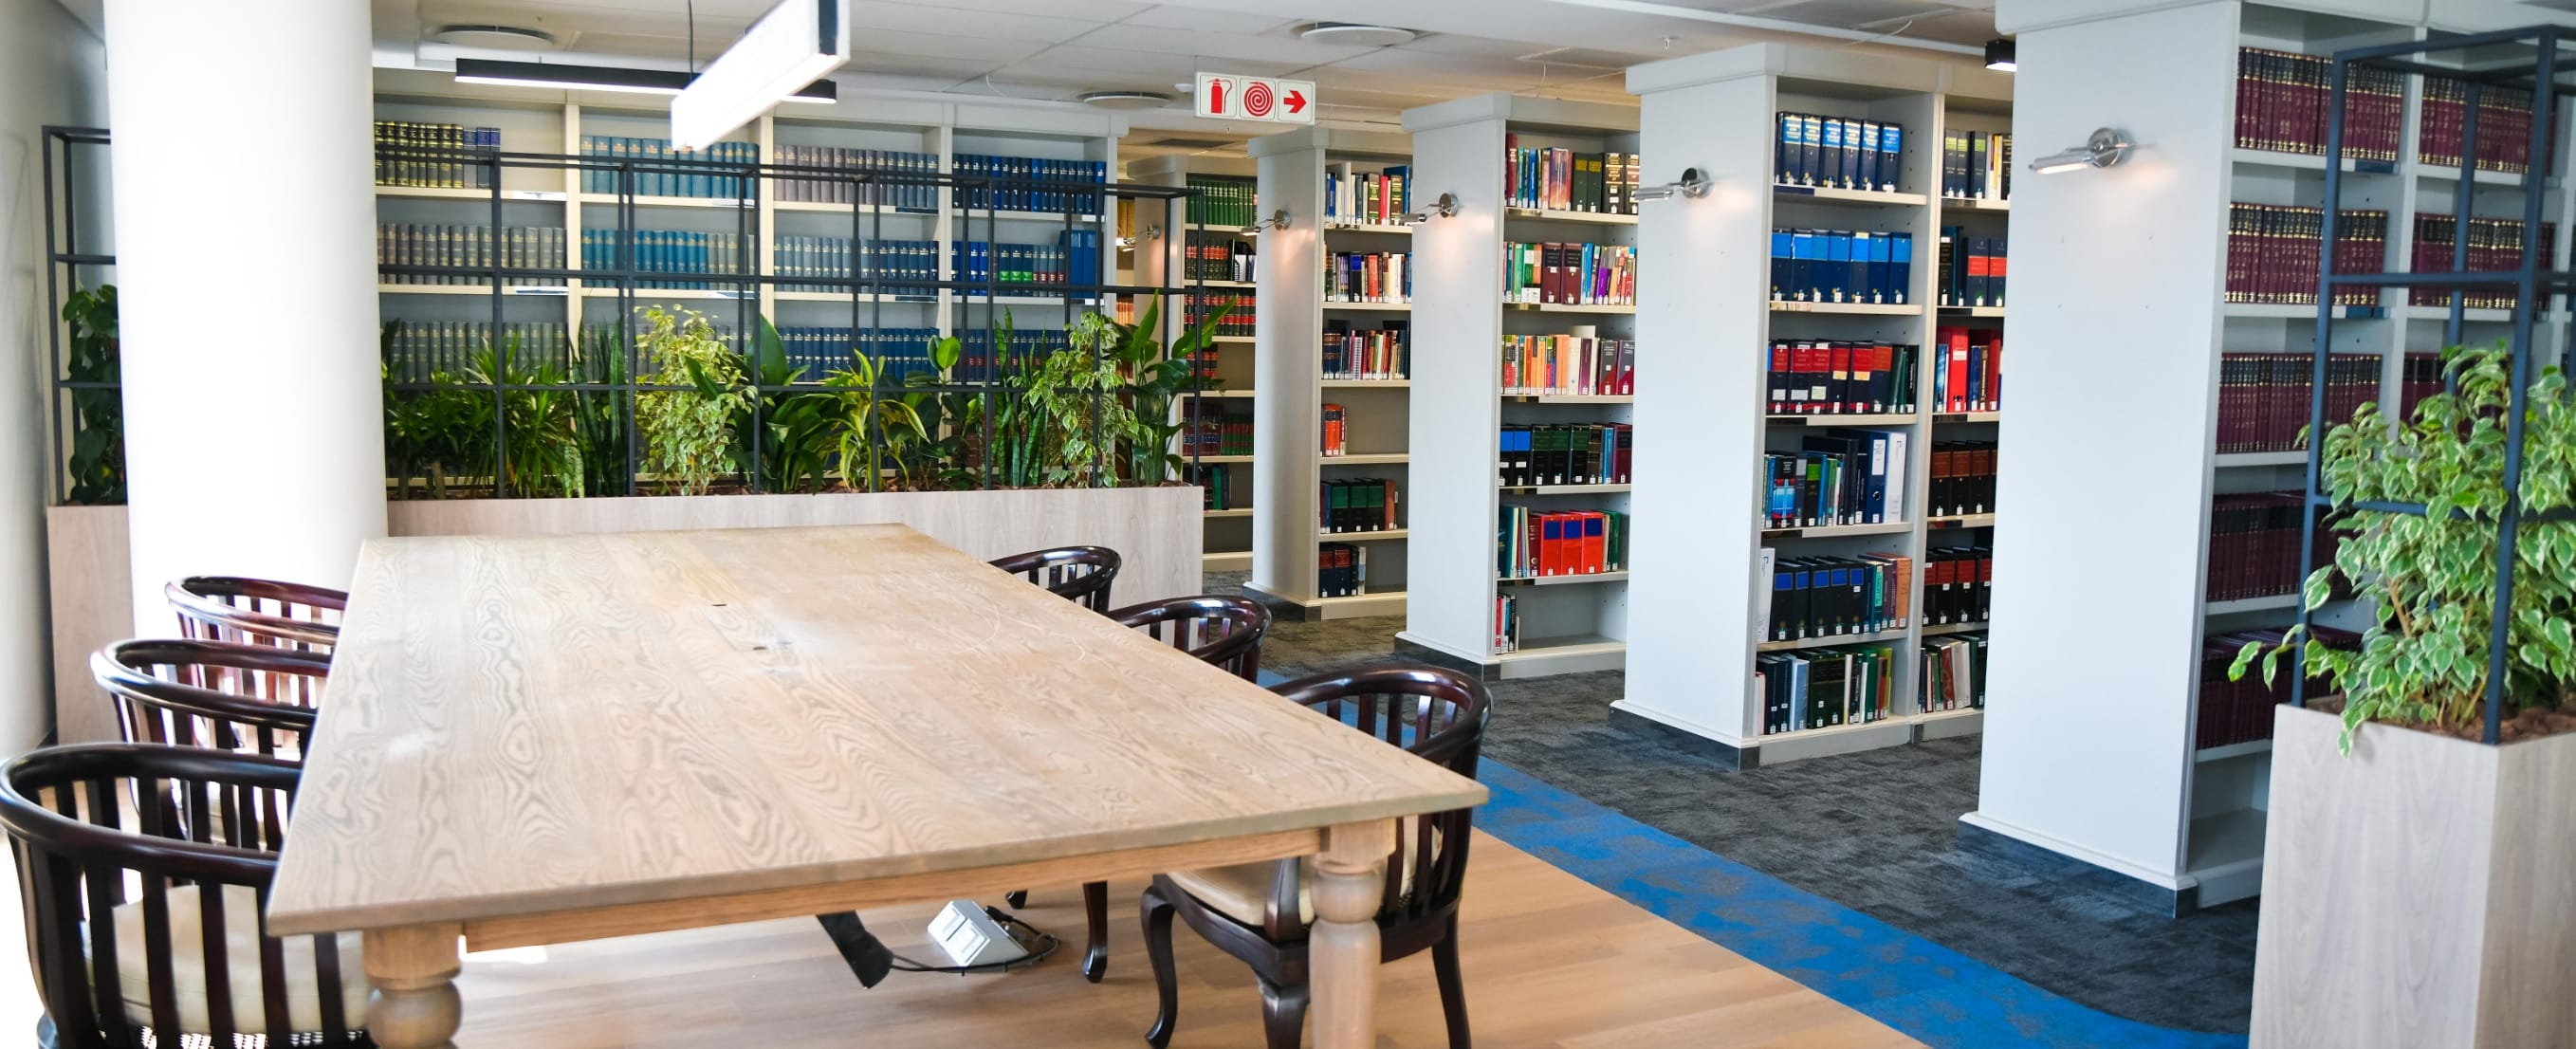 Our libraries is well equipped to support you in your legal research.